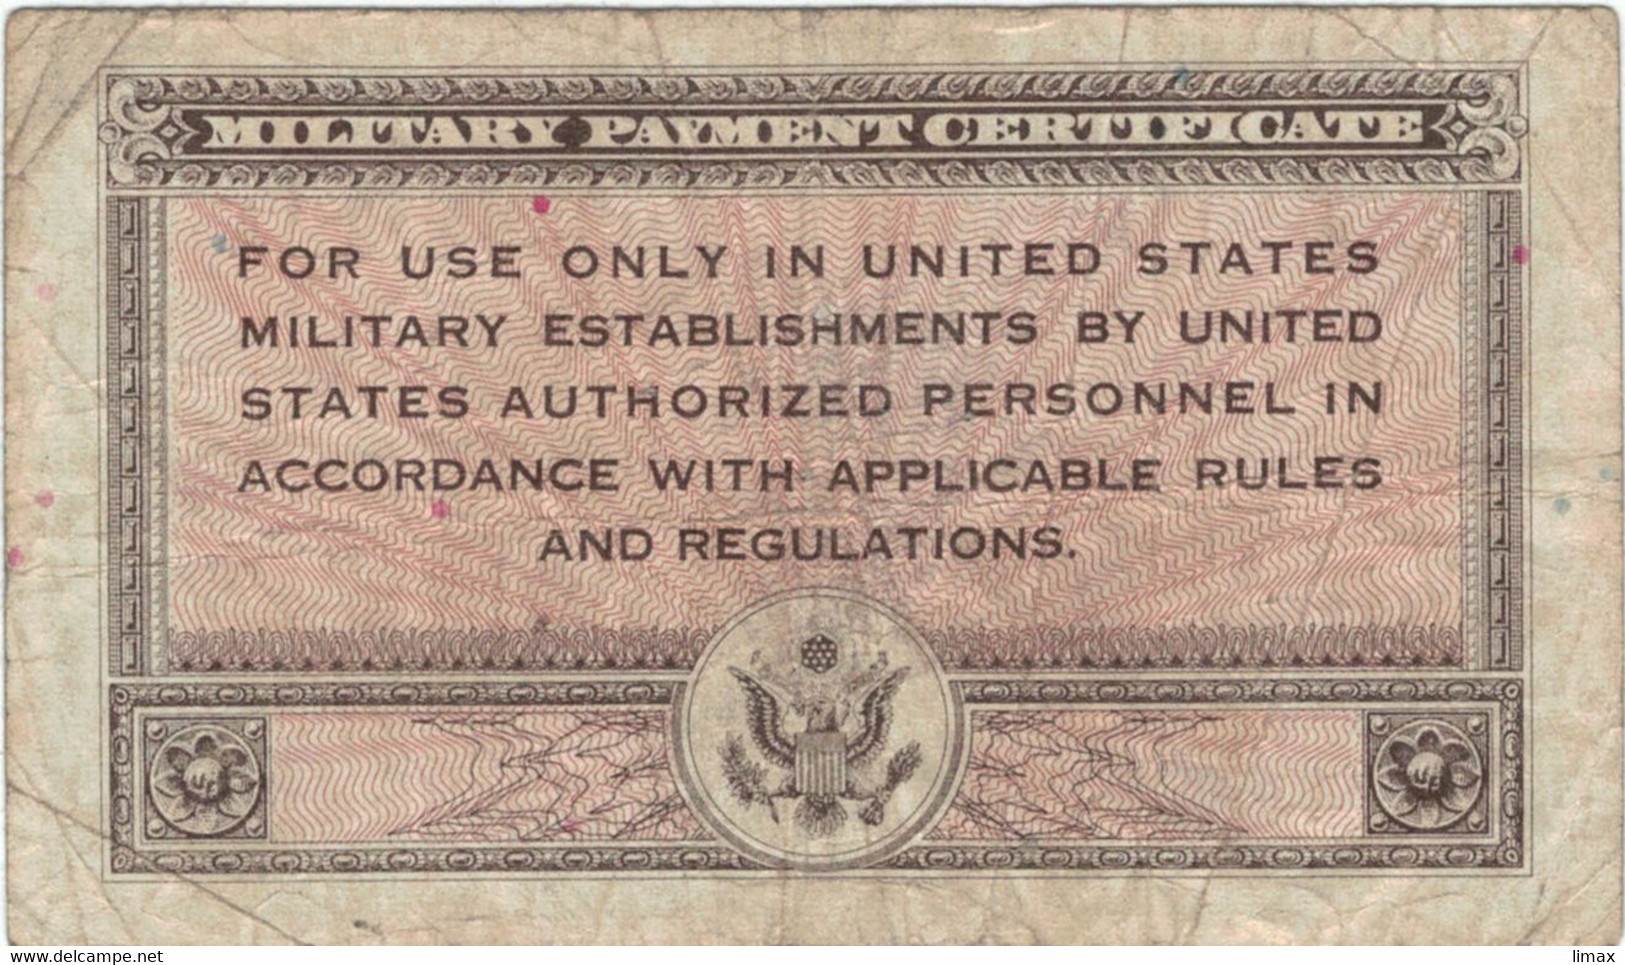 MILITARIA - MILITARY PAYMENT CERTIFICATE SERIE 461 - 1947 NON DATE - ONE 1 DOLLAR A03884712A - 1946 - Series 461